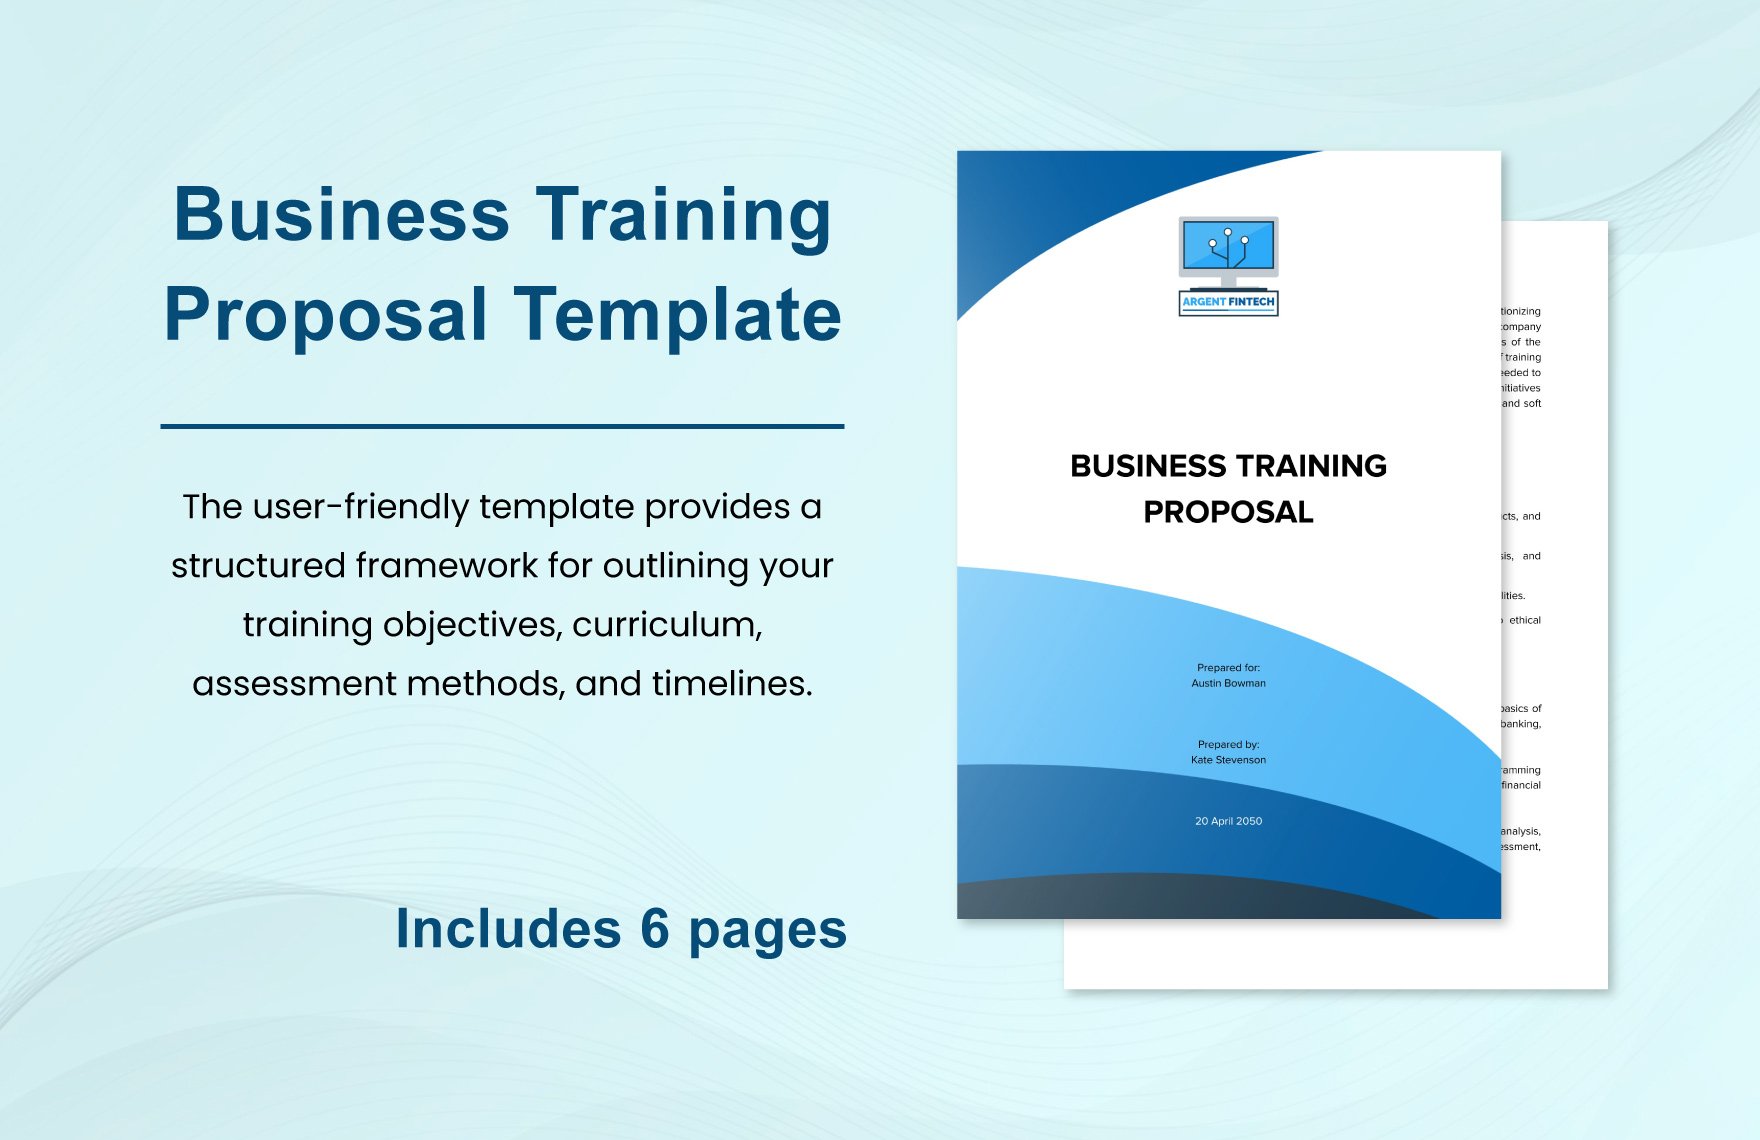 Business Training Proposal Template